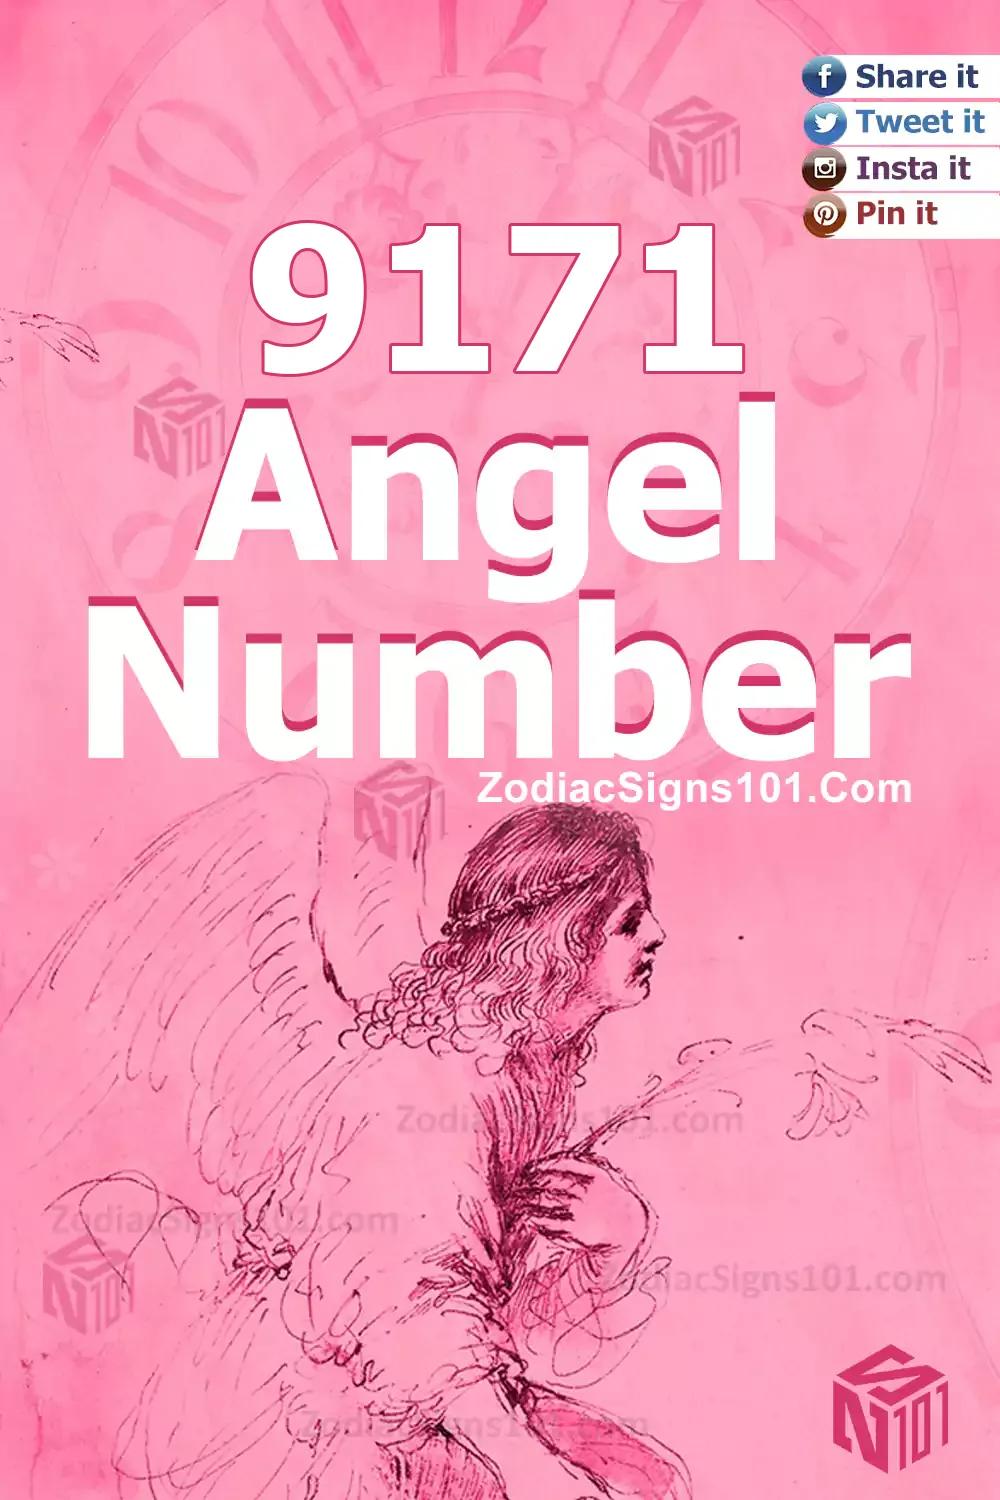 9171 Angel Number Meaning